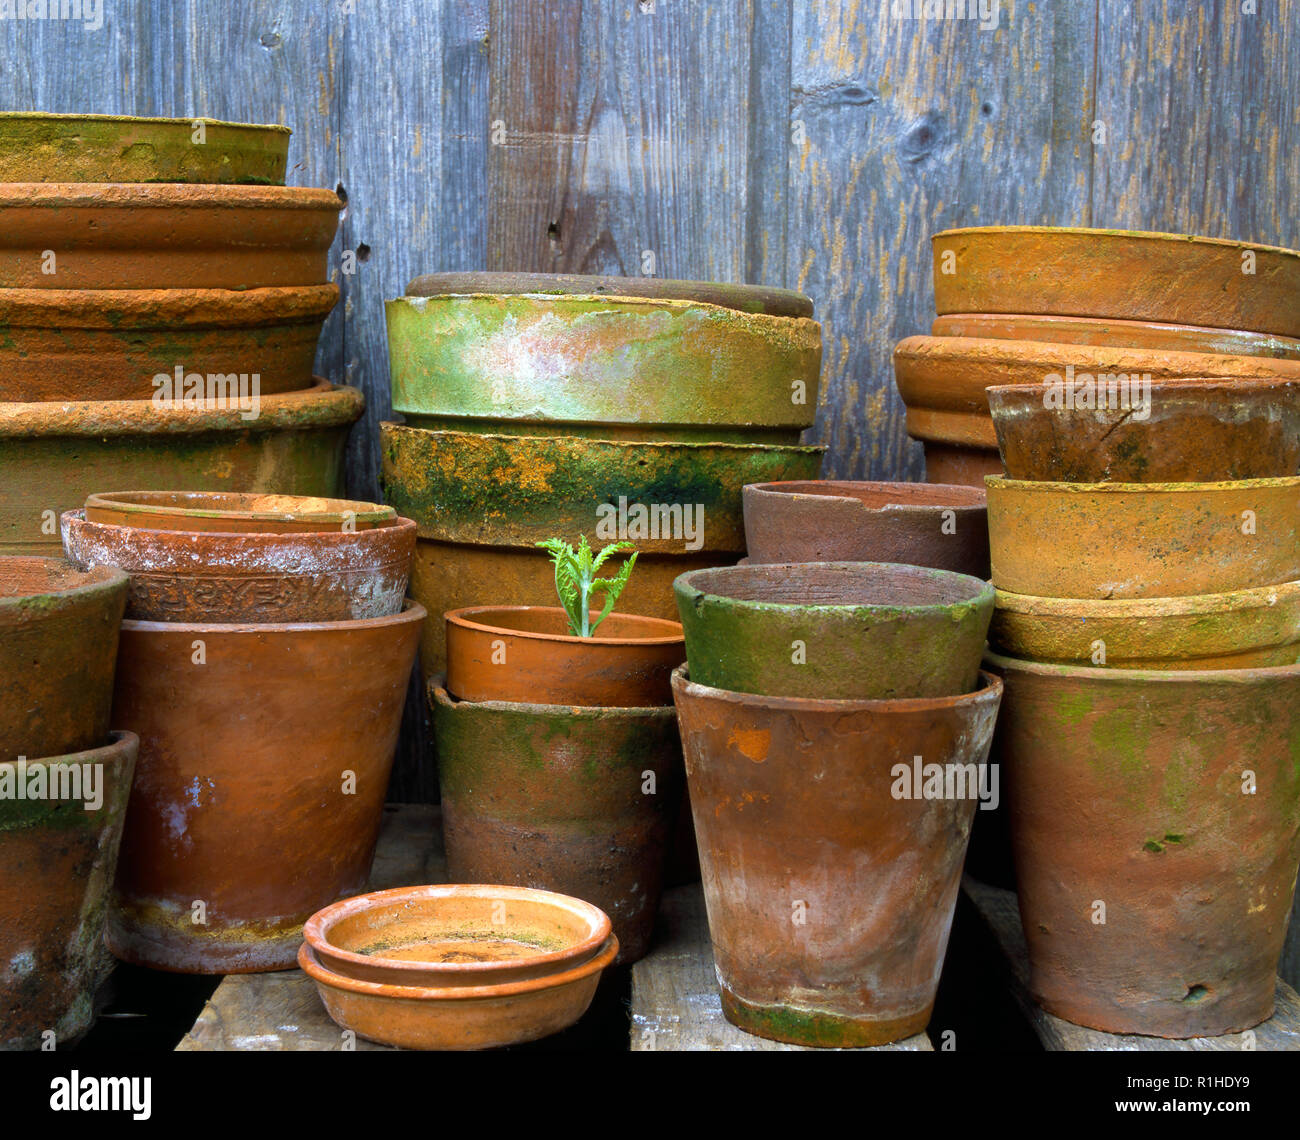 Weathered plant pots with a single green shoot against a wooden background. Stock Photo